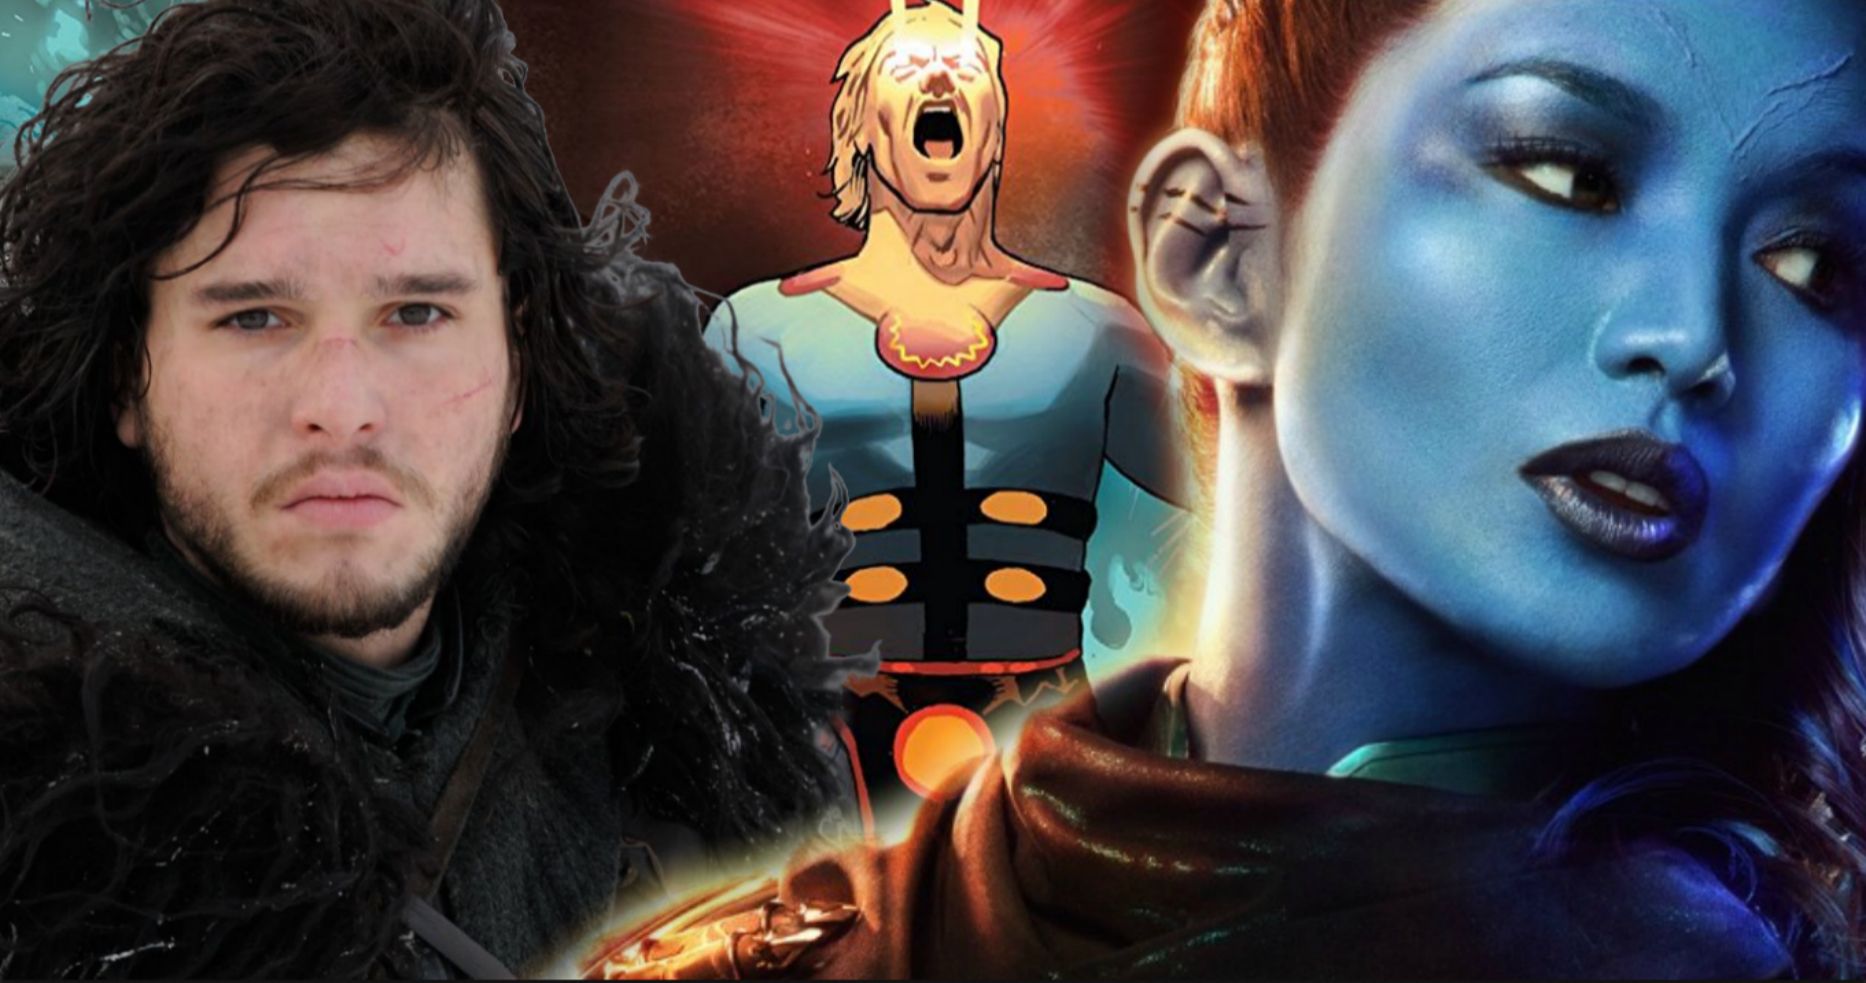 New Eternals Set Photos Bring Kit Harington and Gemma Chan Into the Action